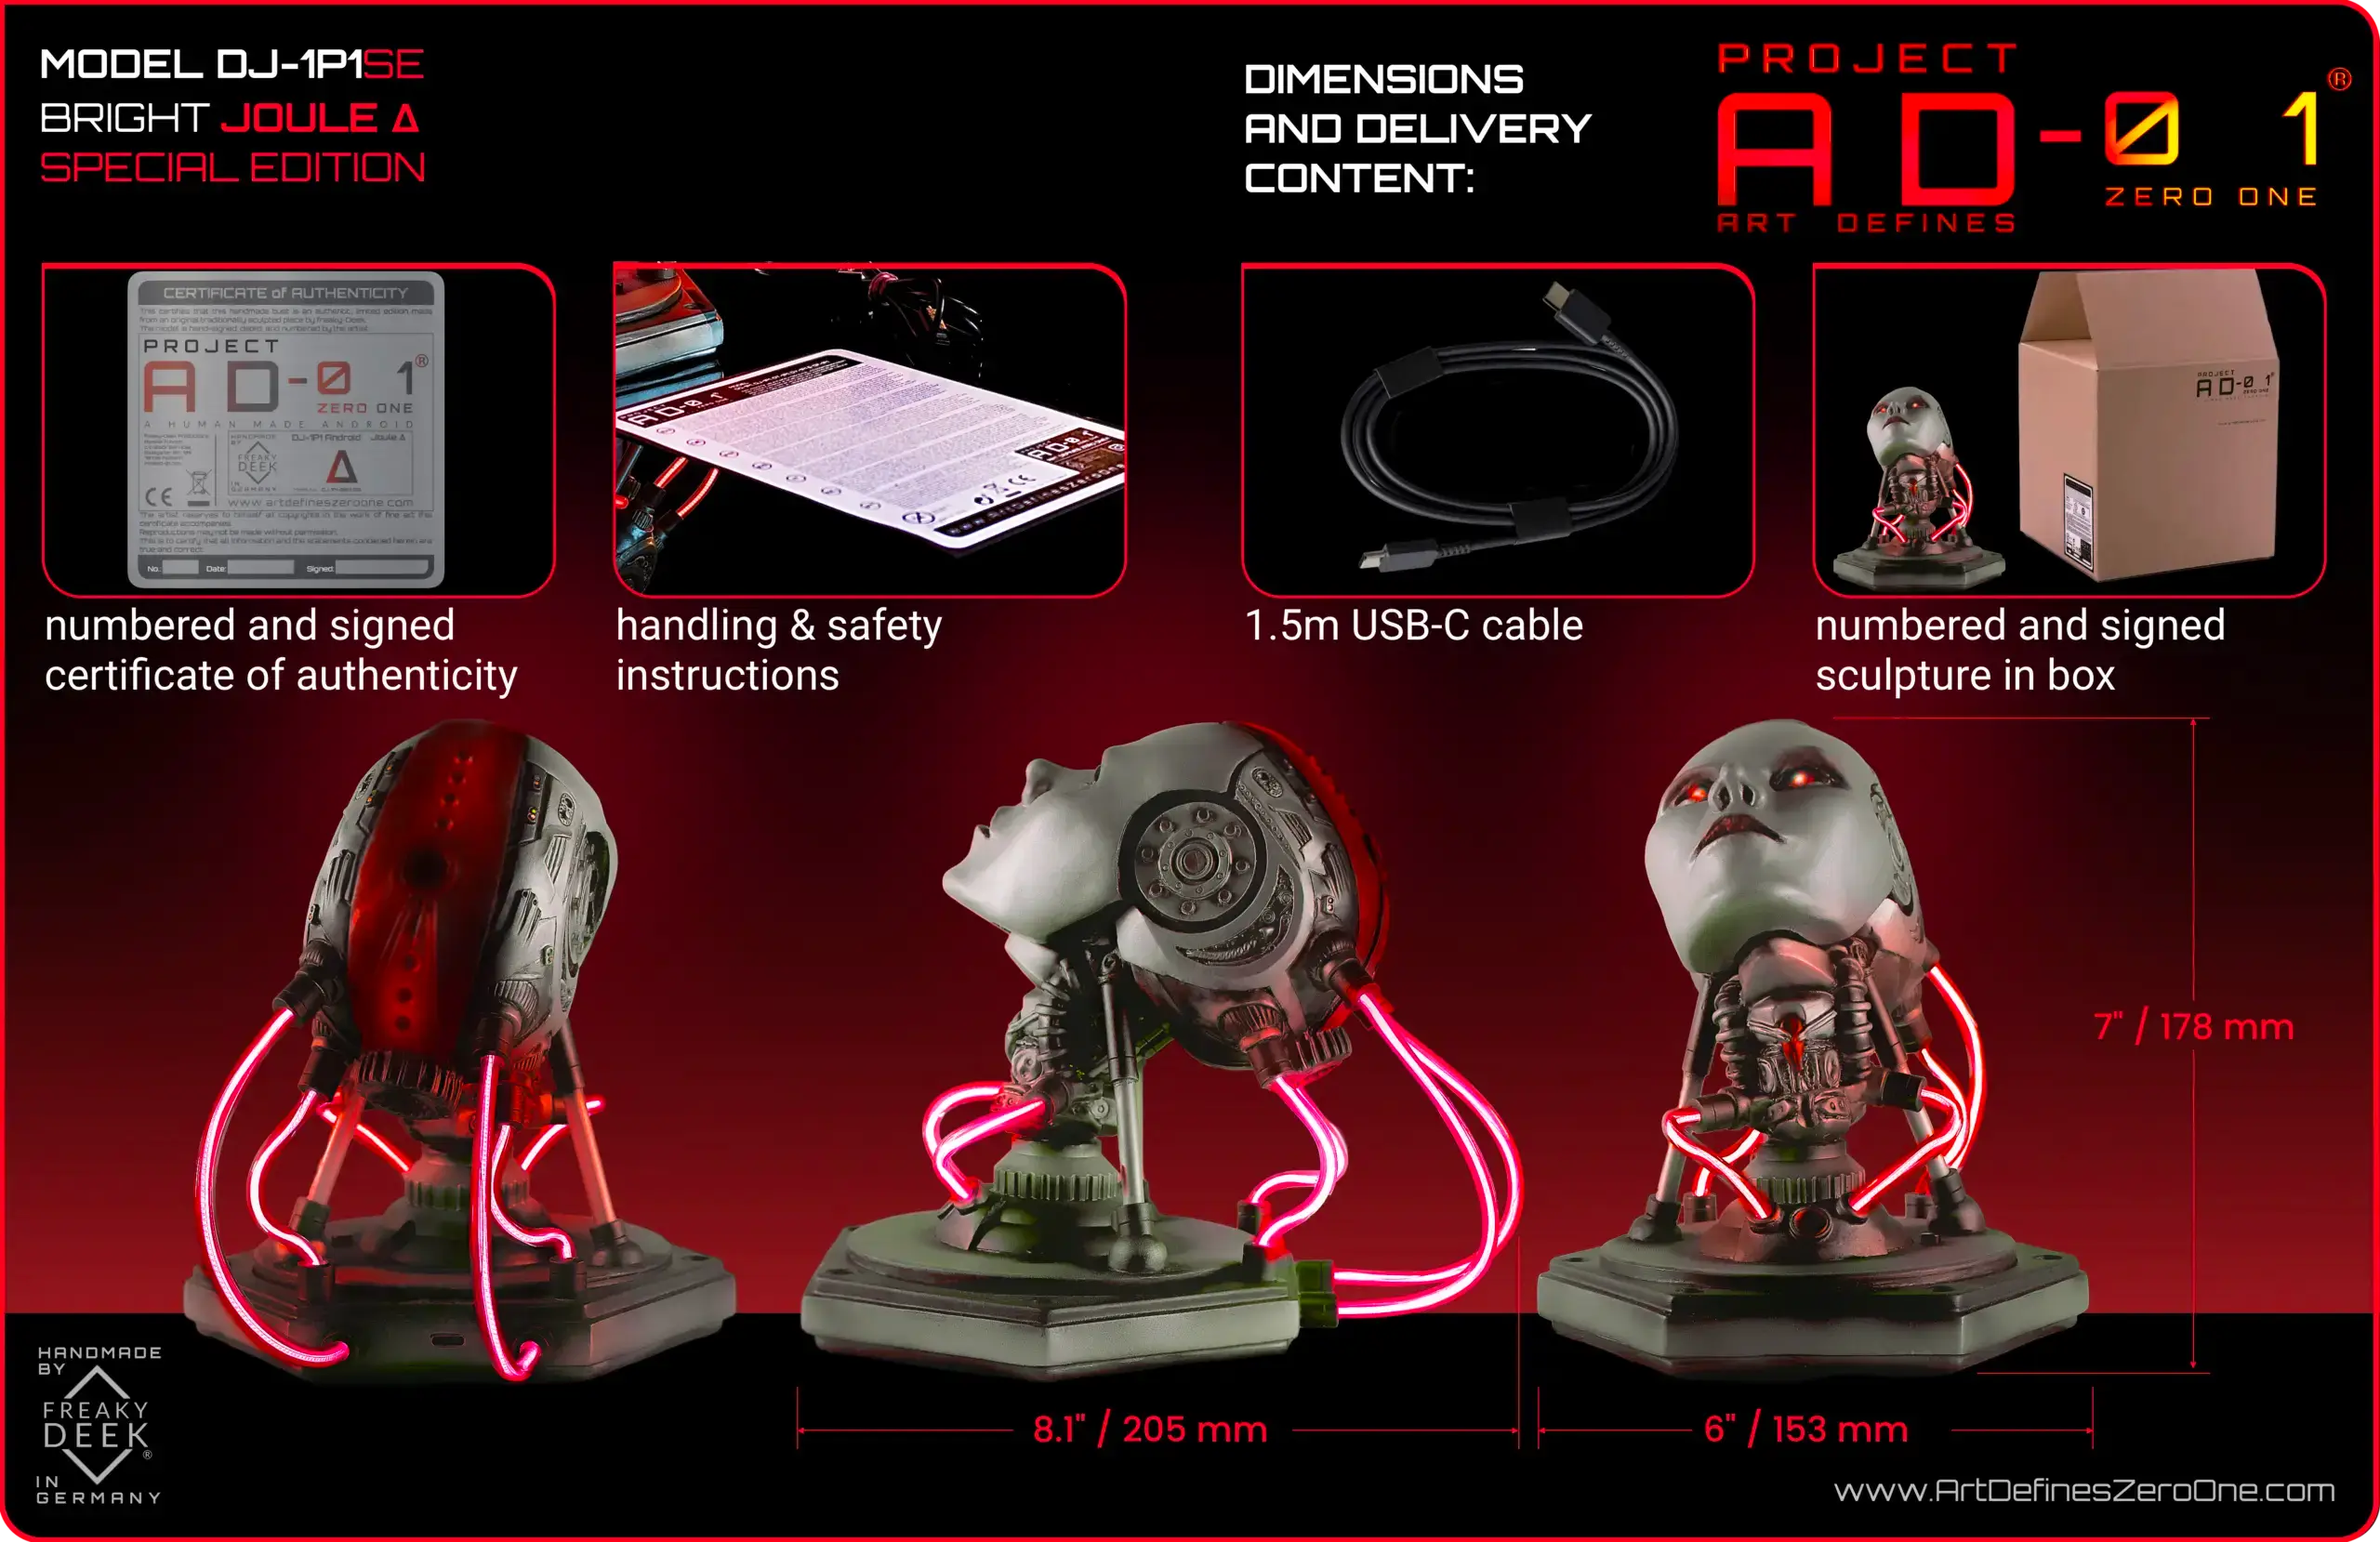 Project AD-01 handmade android sculpture Joule Special Edition with red LED energy tubes from all angles with dimensions and delivery content handsculpted by traditional sculptor freaky-Deek Project AD-01 Joule DELIVERY CONTENT: Dimensions: 178mm x 153 mm x 205mm Weight: approx. 800g (varies due to handcast and paint process) handmade android bust numbered and signed certificate of authenticity handling & safety instructions USB-C cable